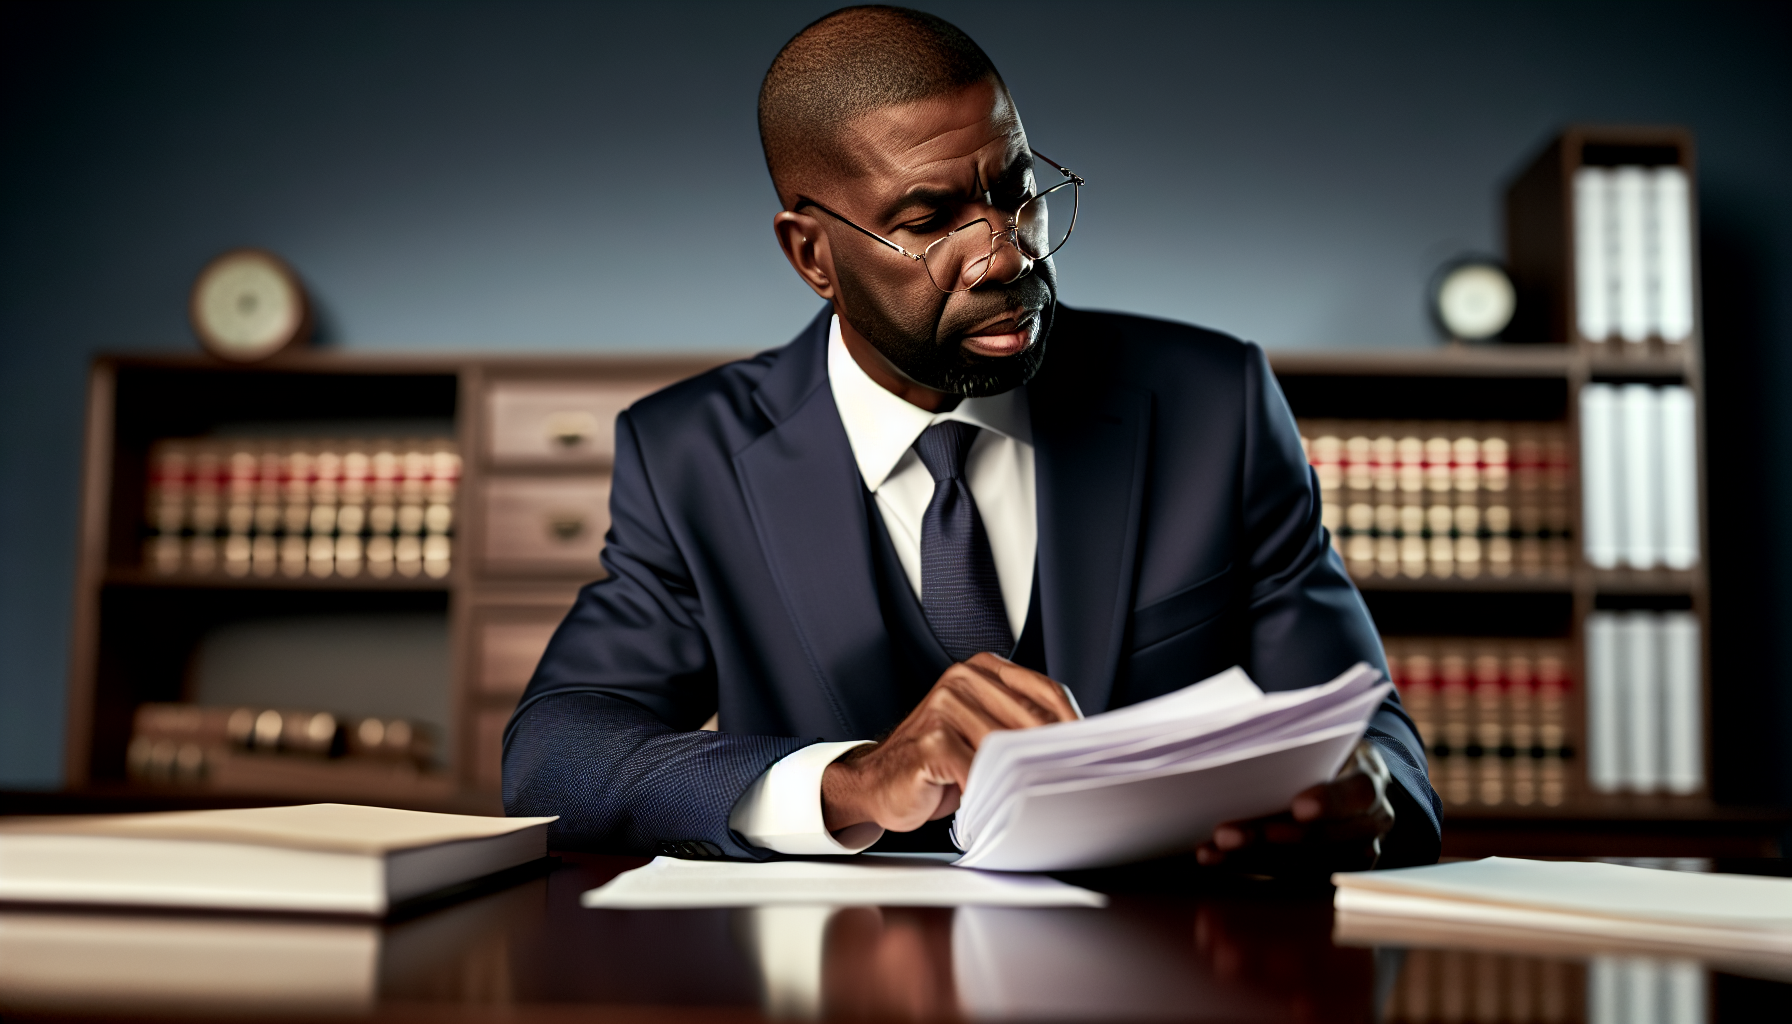 Experienced criminal defense attorney reviewing legal documents